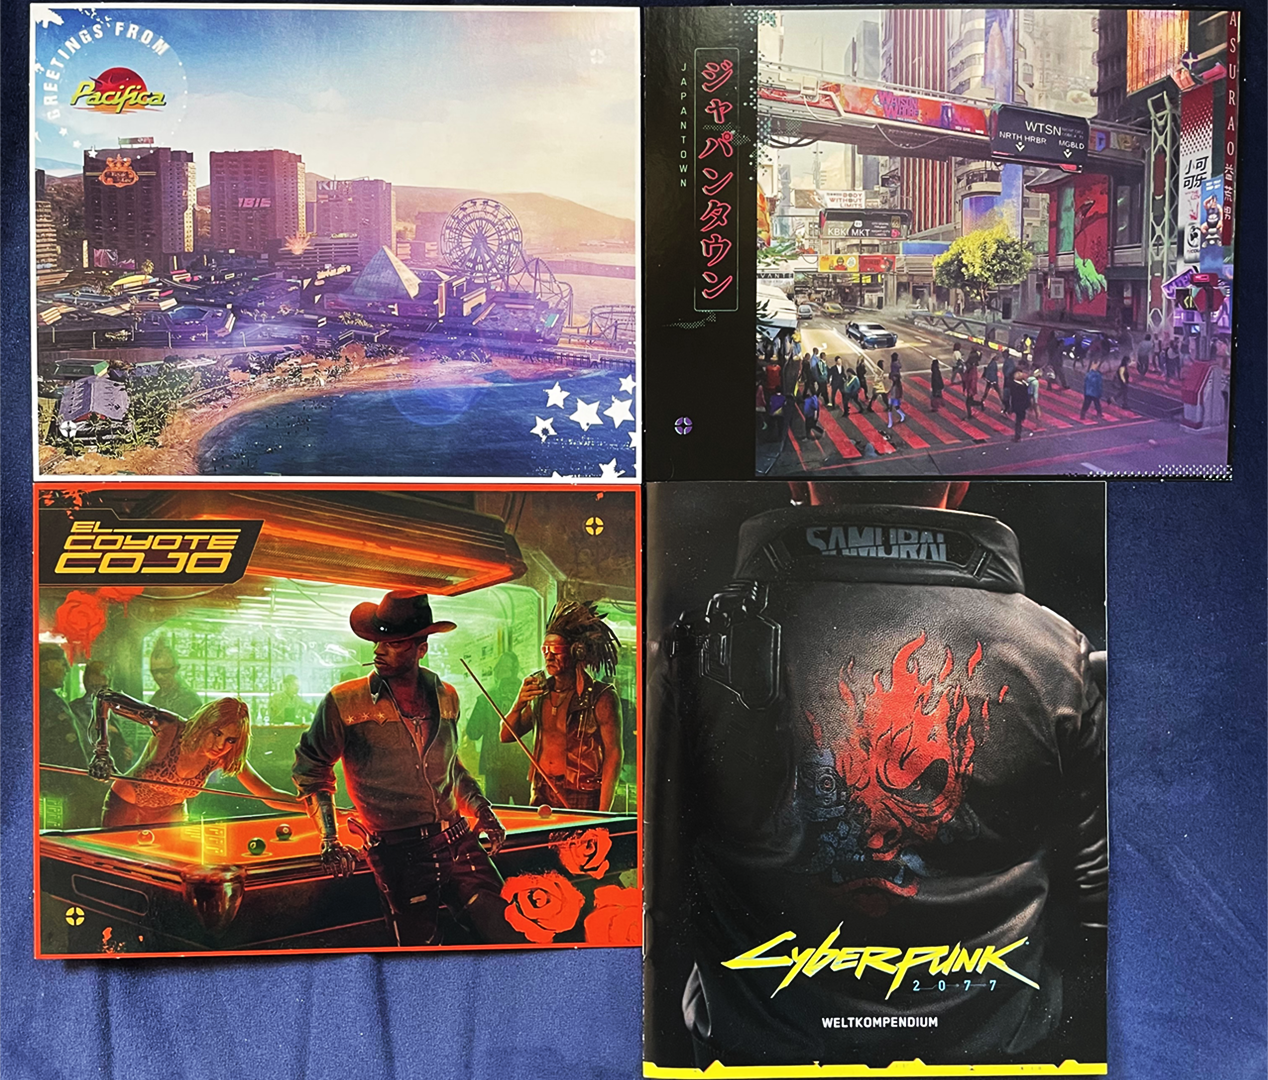 Postcards and World Compendium from Cyberpunk 2077